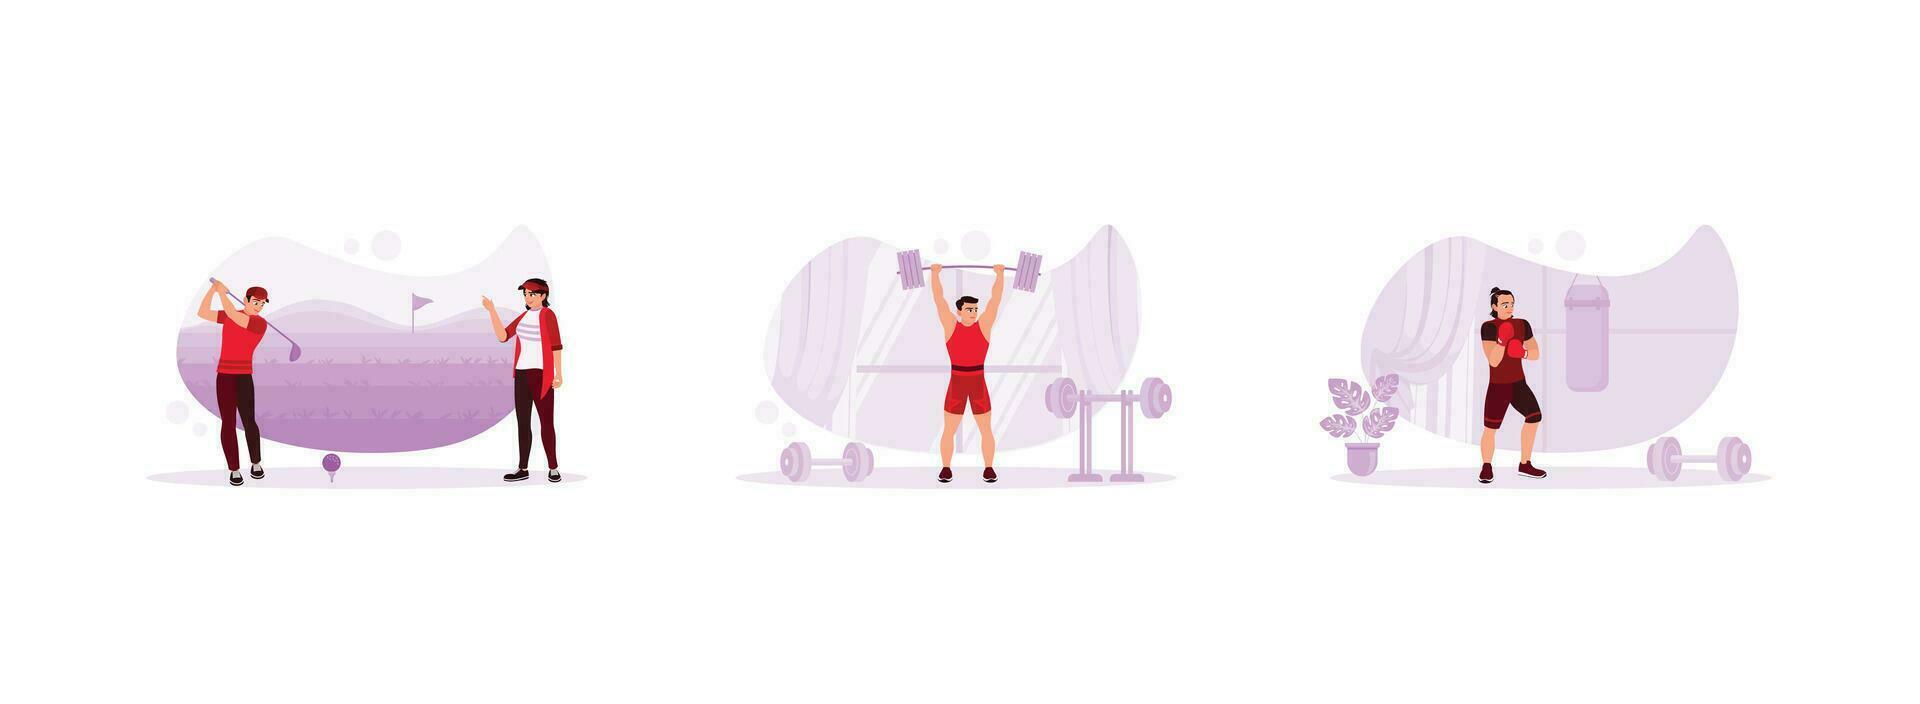 Sports athlete concept. Male and female golfers play golf on the course. Strong and active weightlifter. Professional boxer training in gym room. Set Trend Modern vector flat illustration